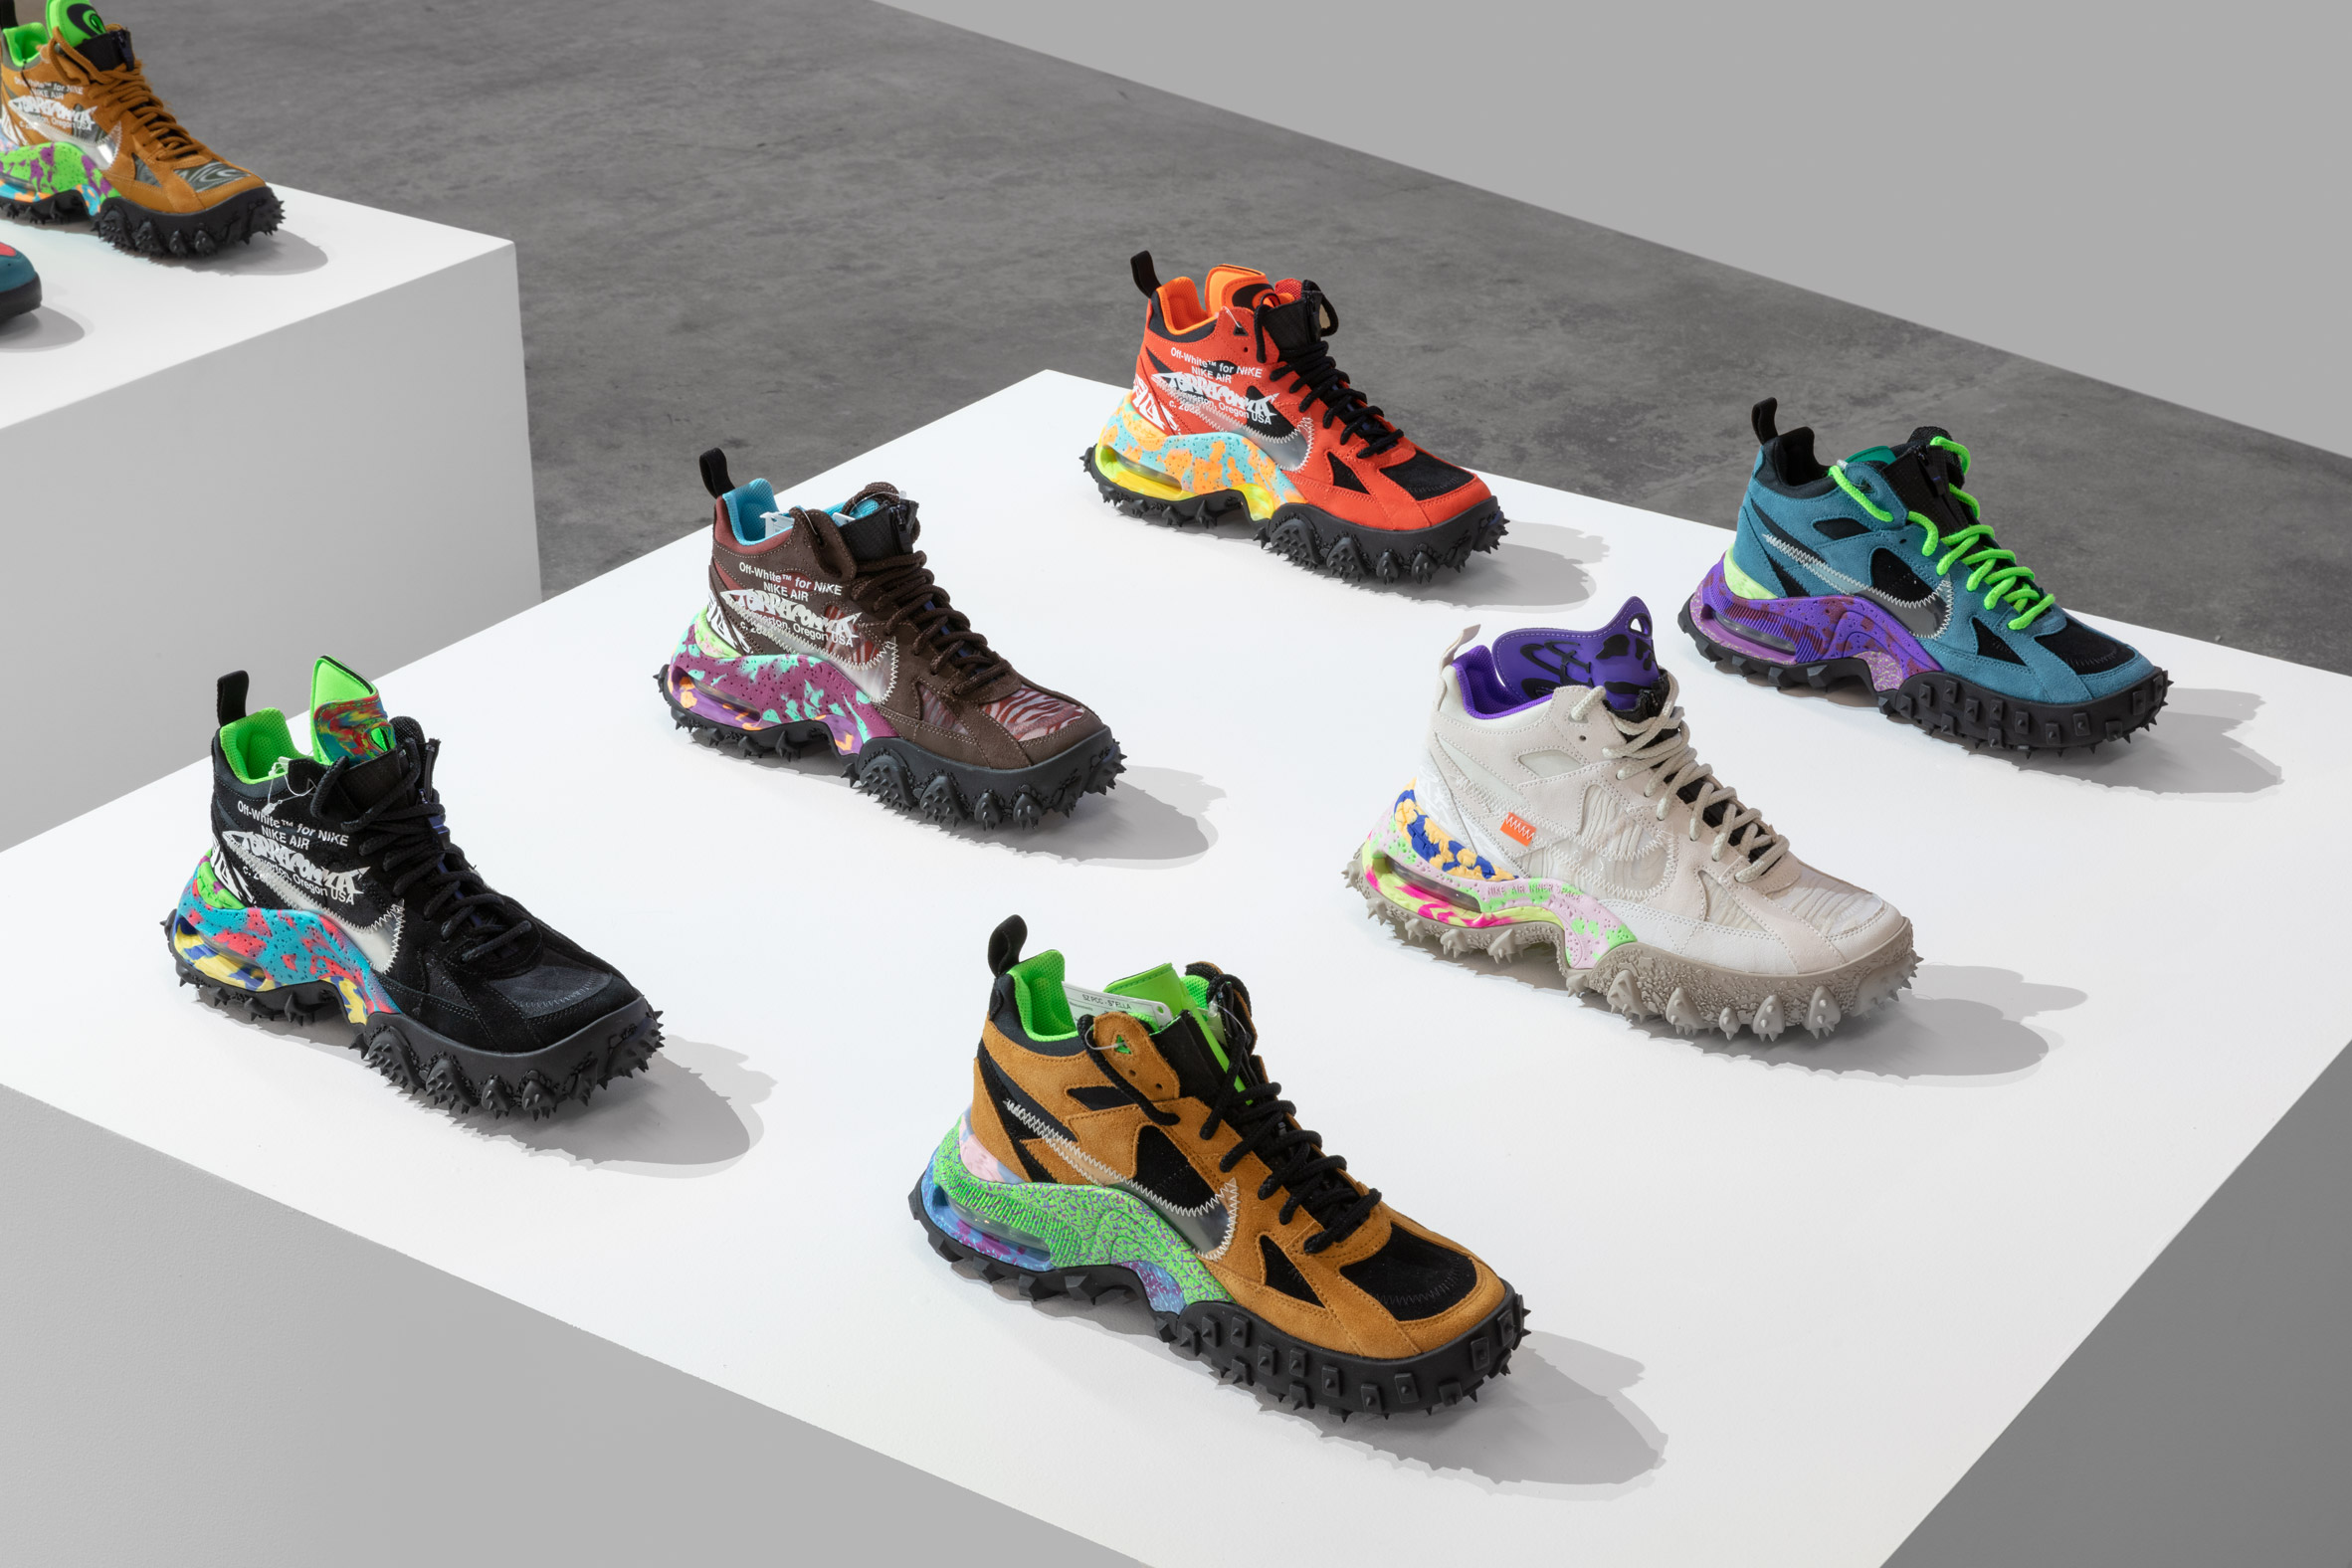 Art Installations Pop Up All over New York City to Celebrate Louis Vuitton  and Nike 'Air Force 1' Designed by Virgil Abloh - Galerie